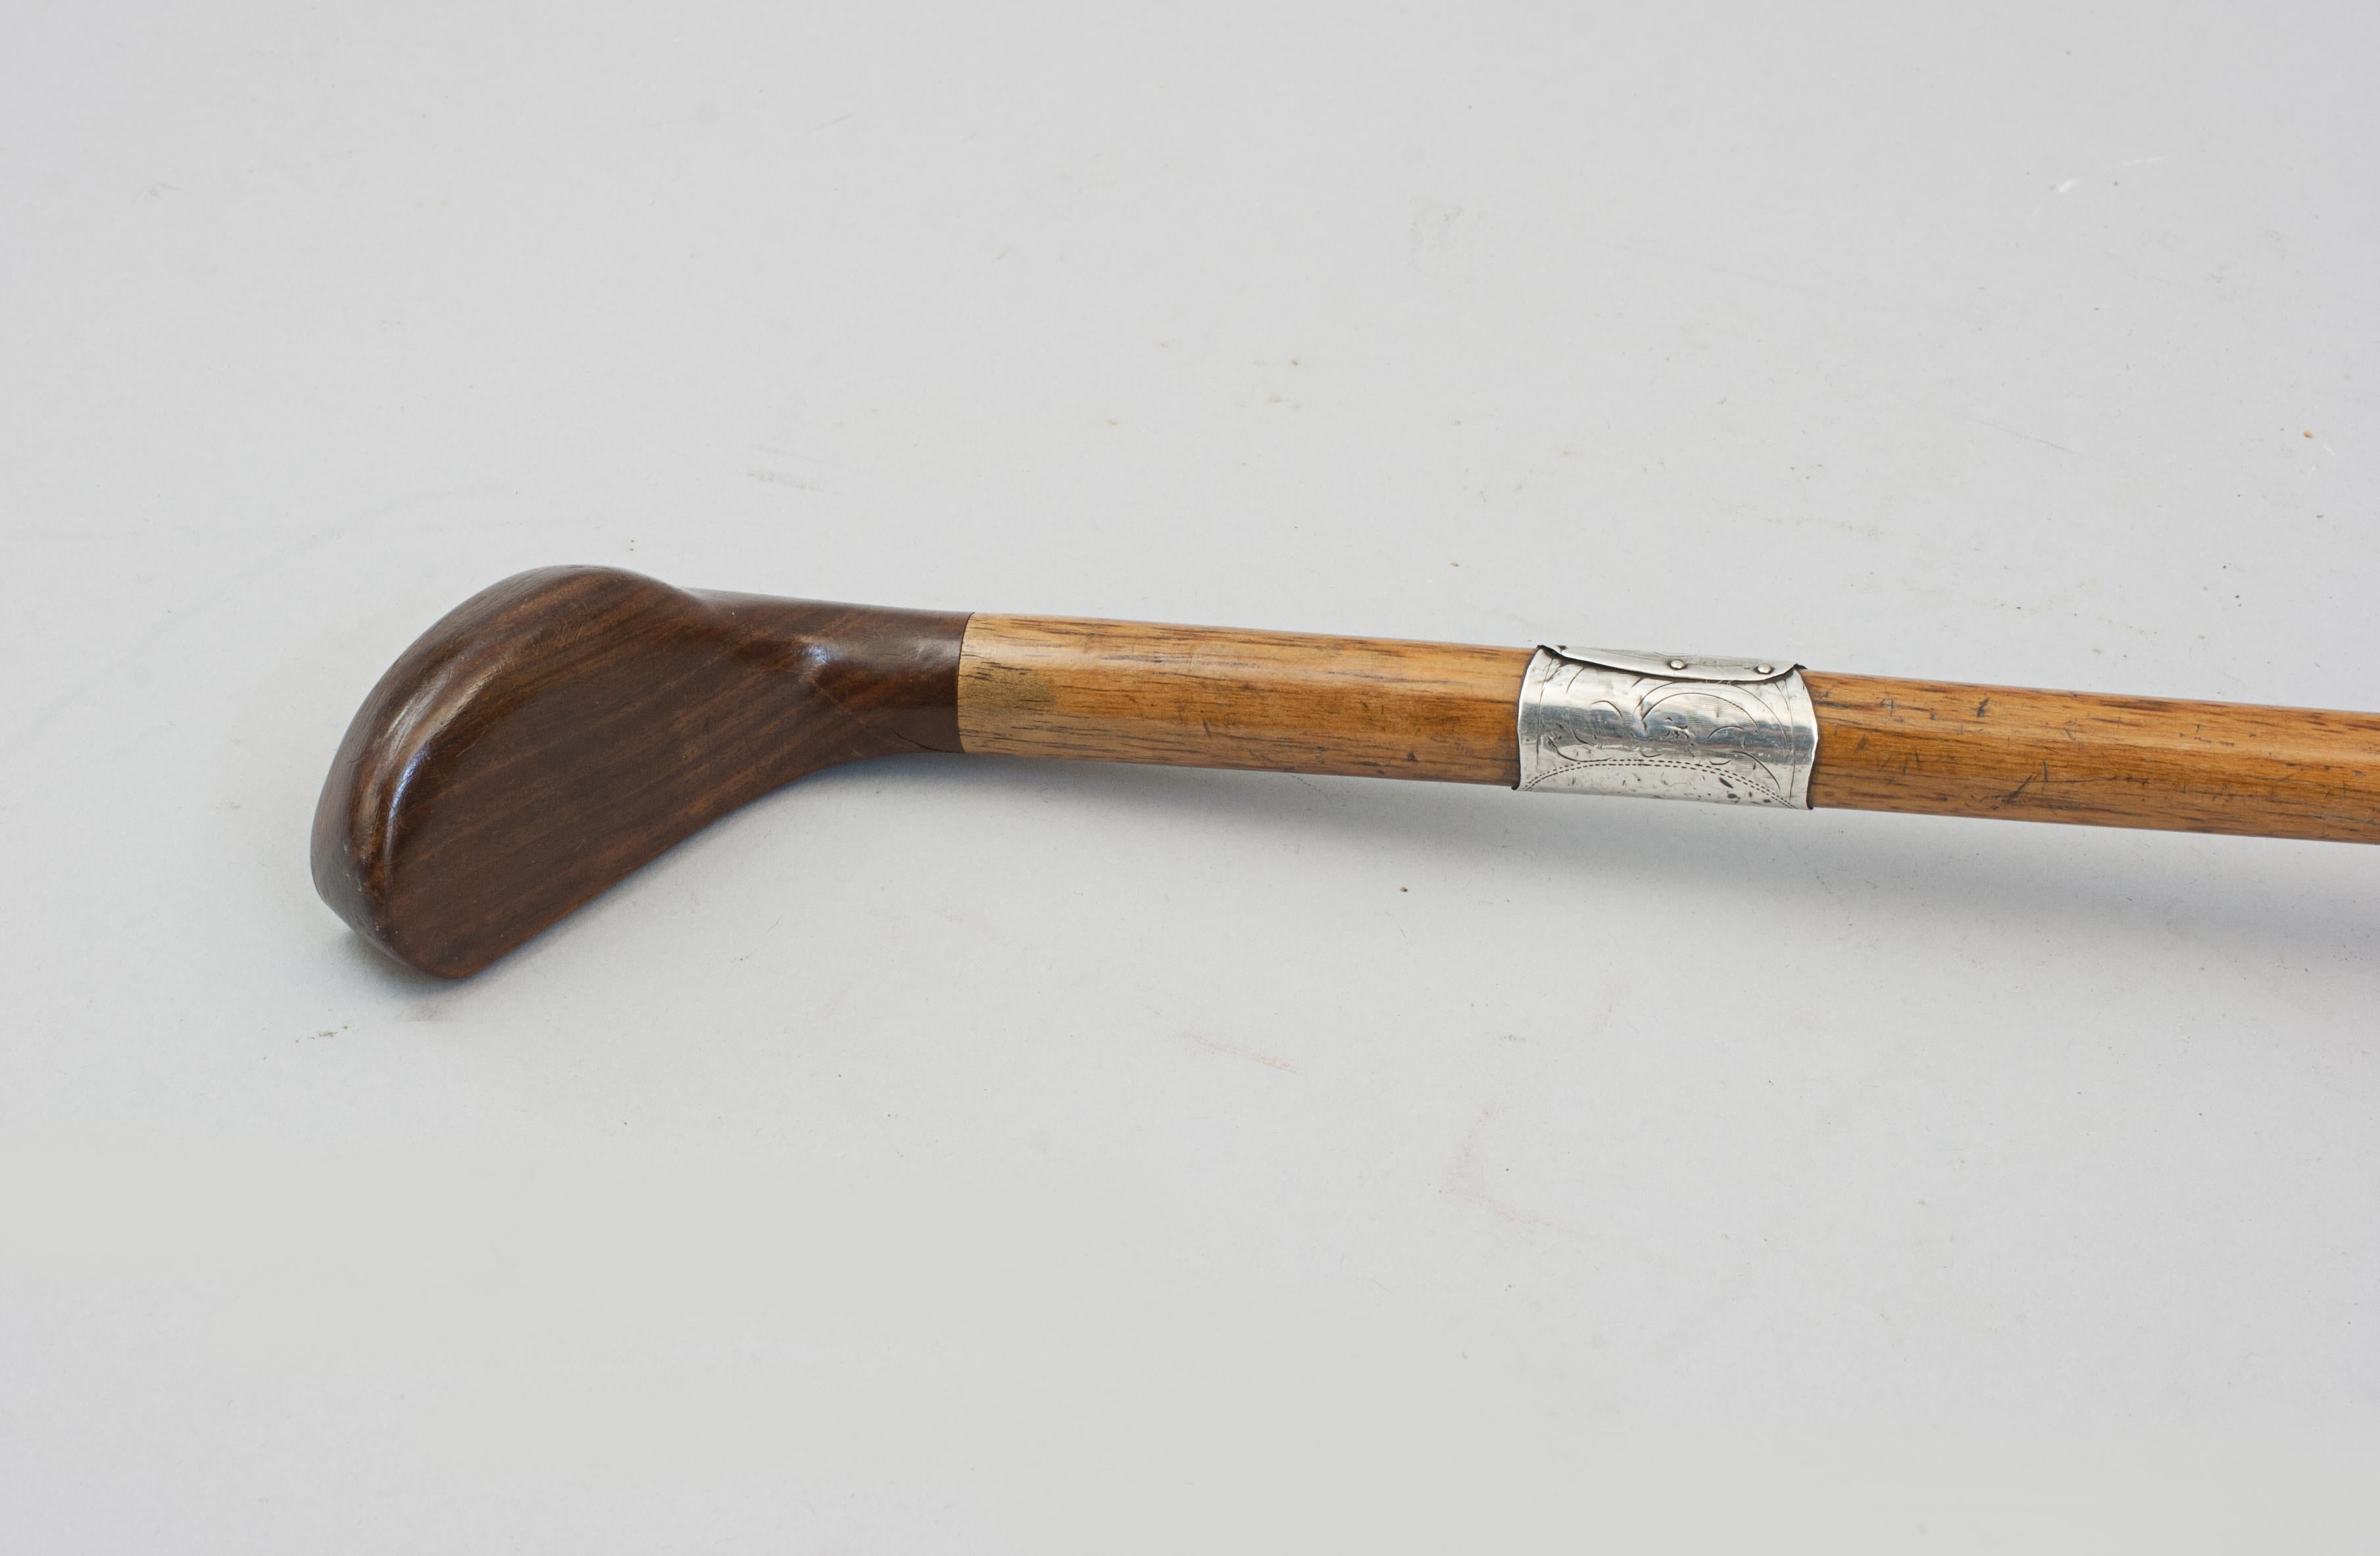 Antique Sunday Club, Golf Club Walking Stick.
A desirable walking cane with the handle in the shape of a golf club head. The gentleman's walking stick has a persimmon socket head handle with a pegged horn insert. It is with hickory shaft with a